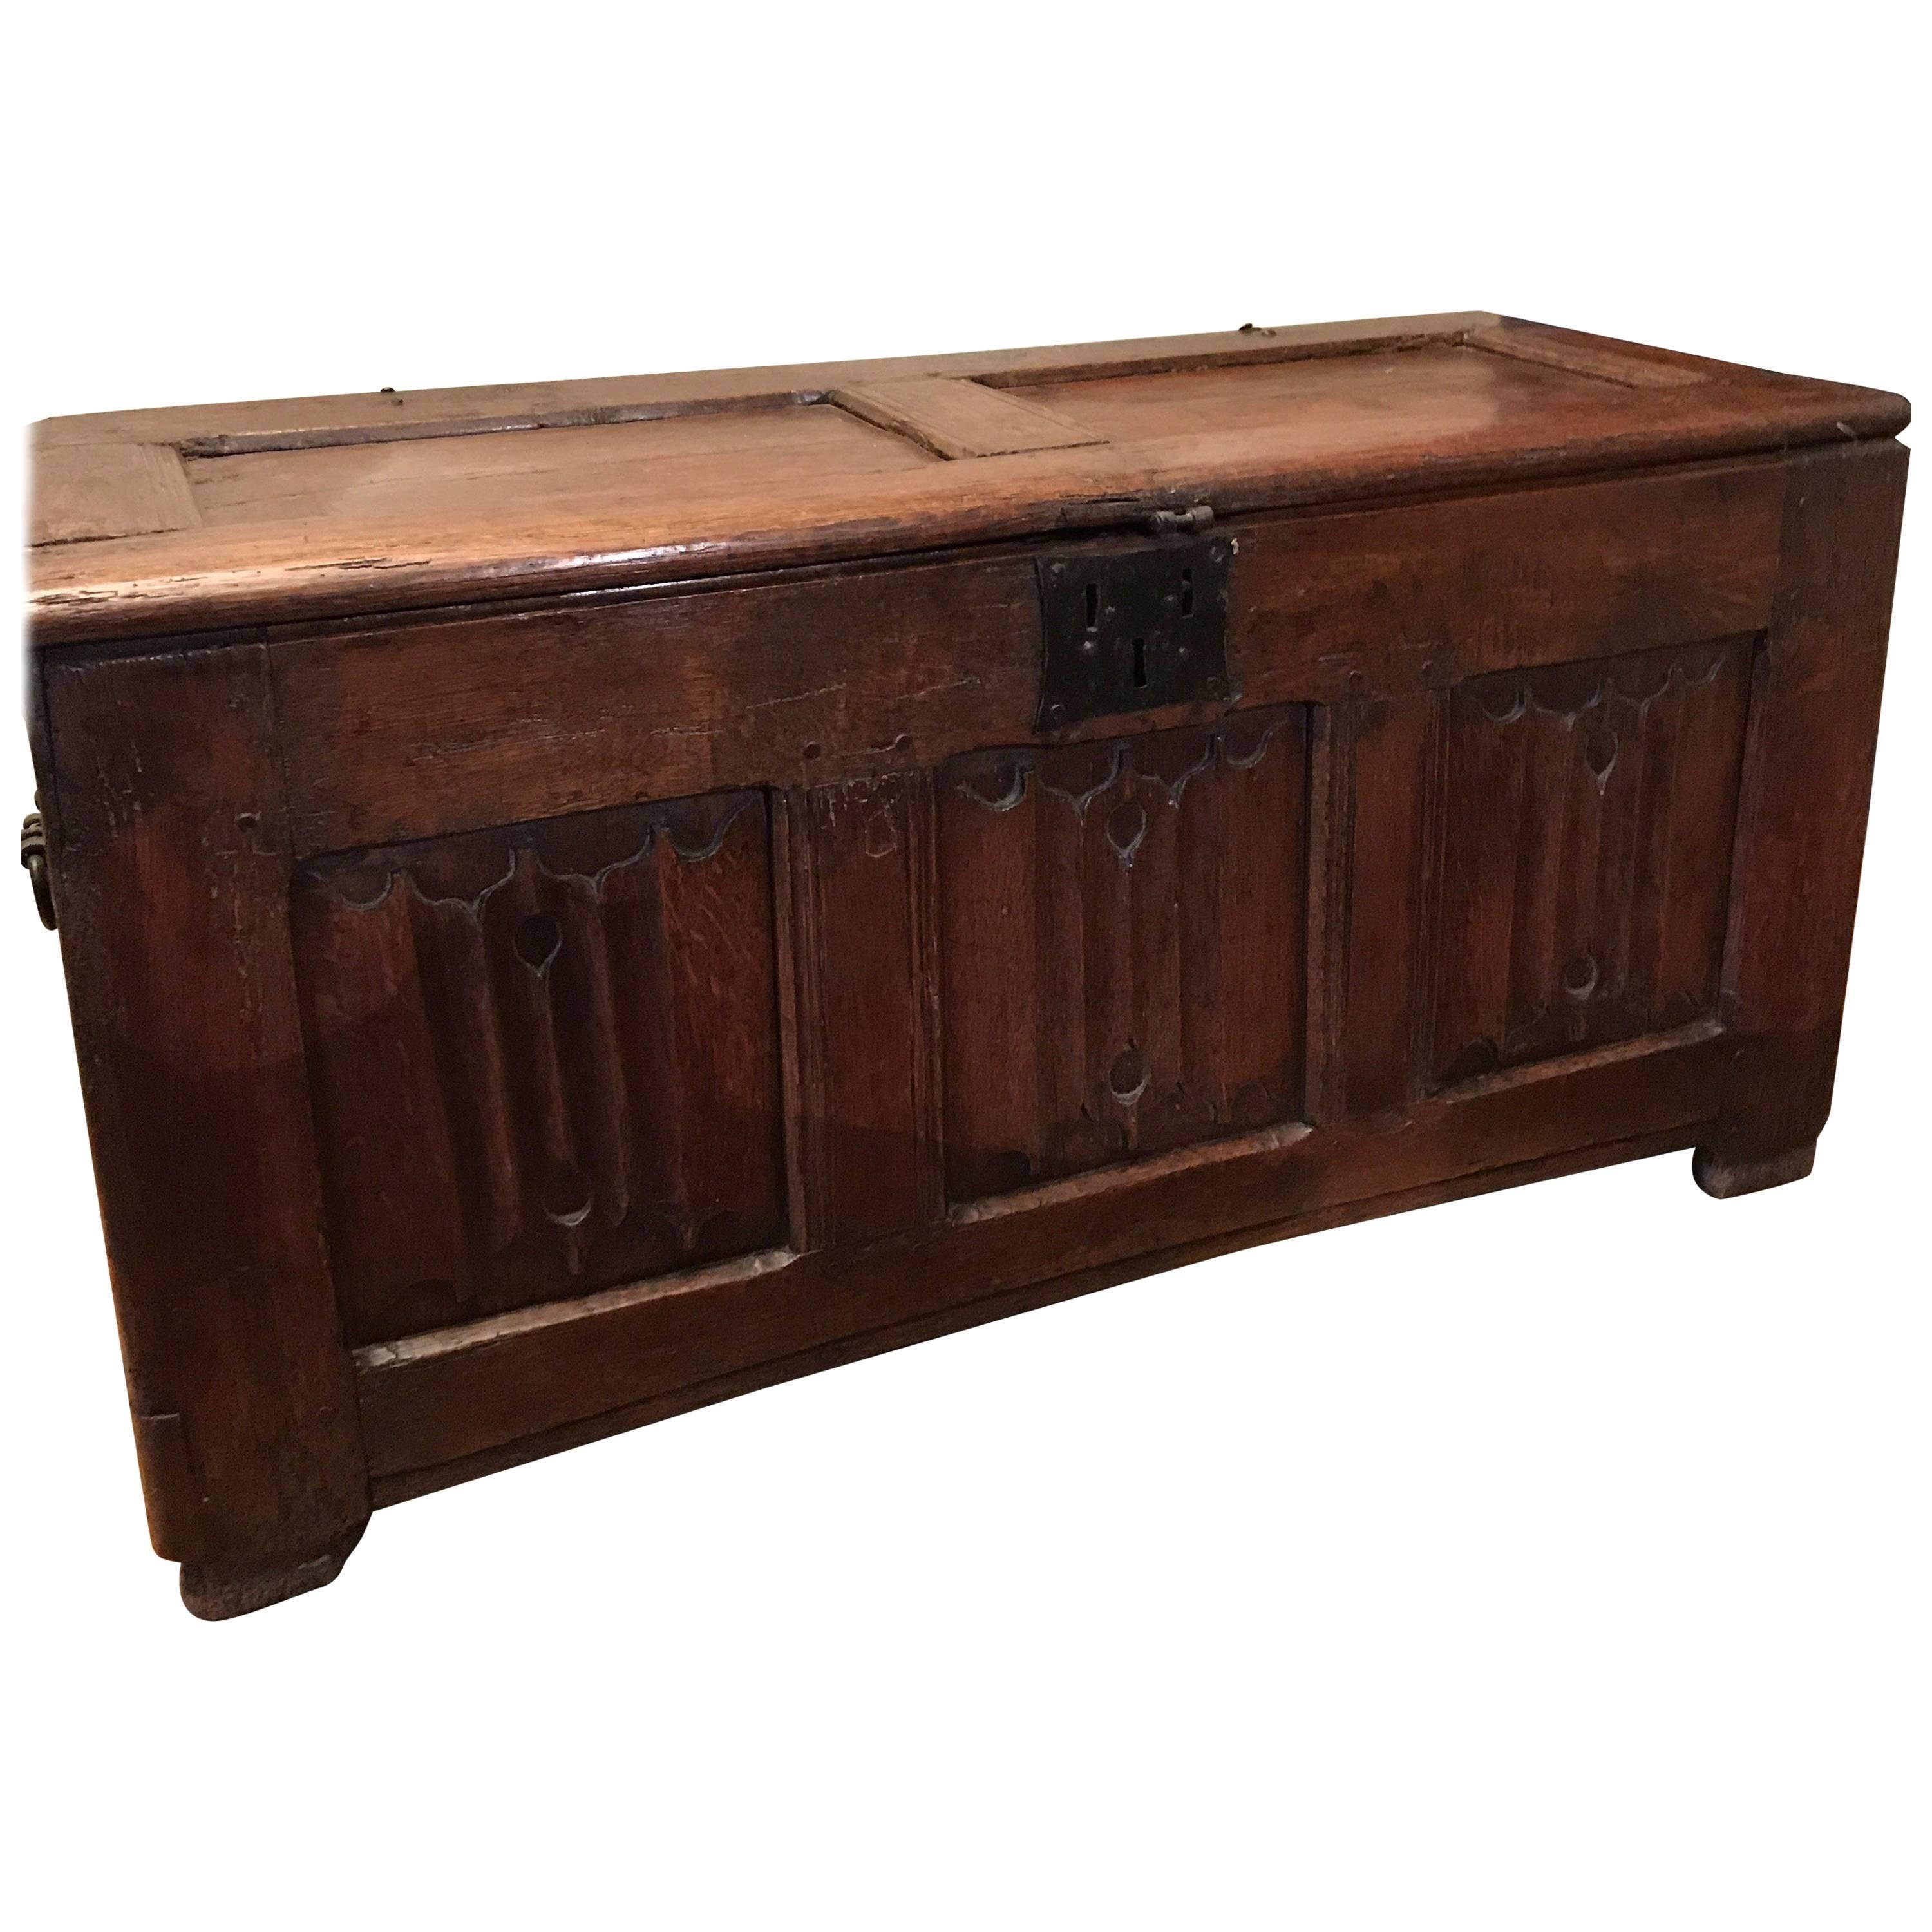 Gothic Late 15th Century Chest Linenfold Pannels of the Period